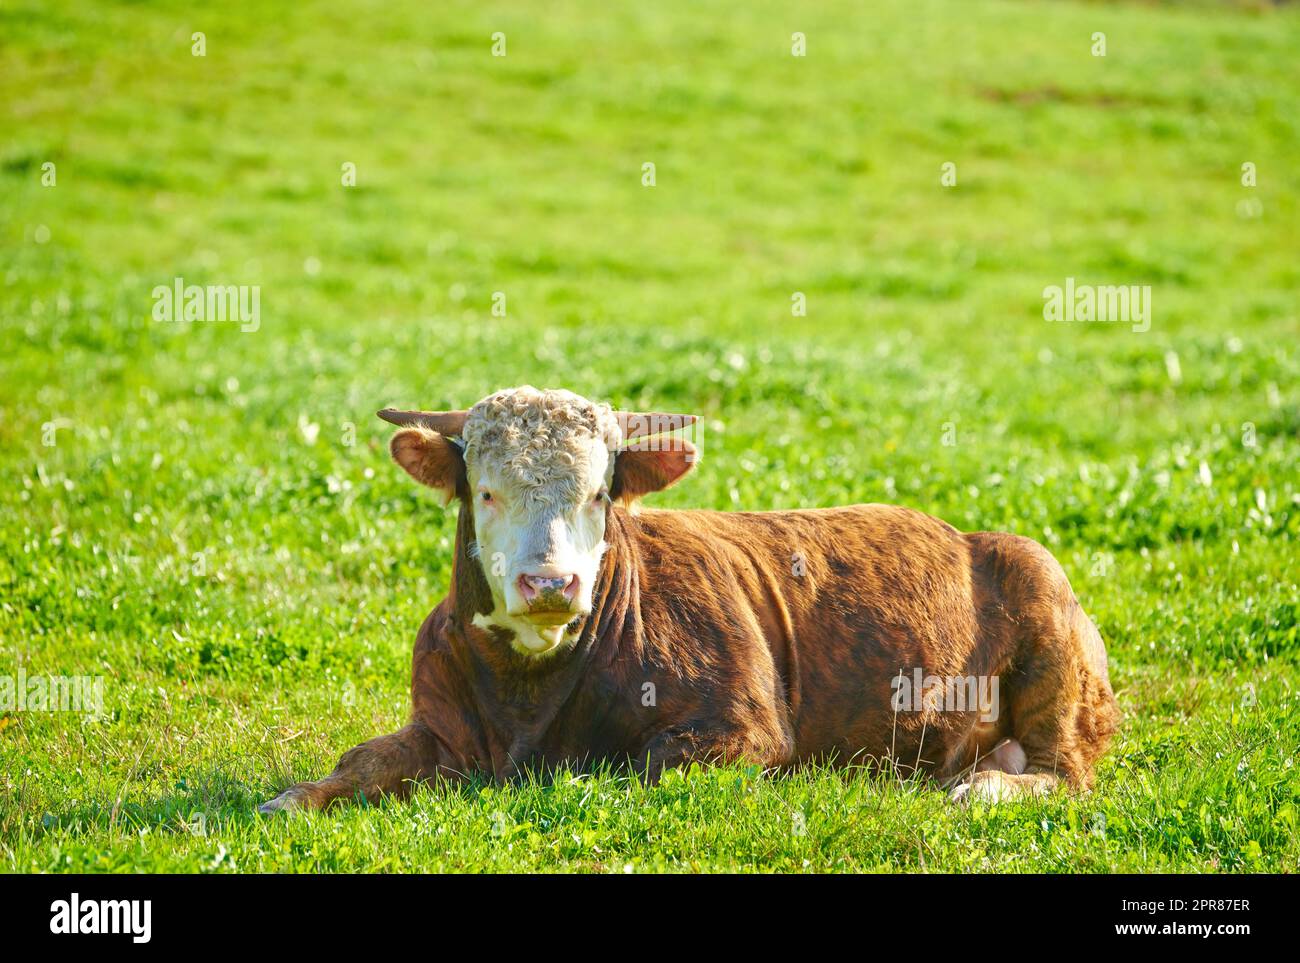 One cow sitting on a green field in rural countryside with copy space. Raising and breeding livestock cattle on a farm for beef and dairy industry. Landscape one animal on pasture or grazing land Stock Photo